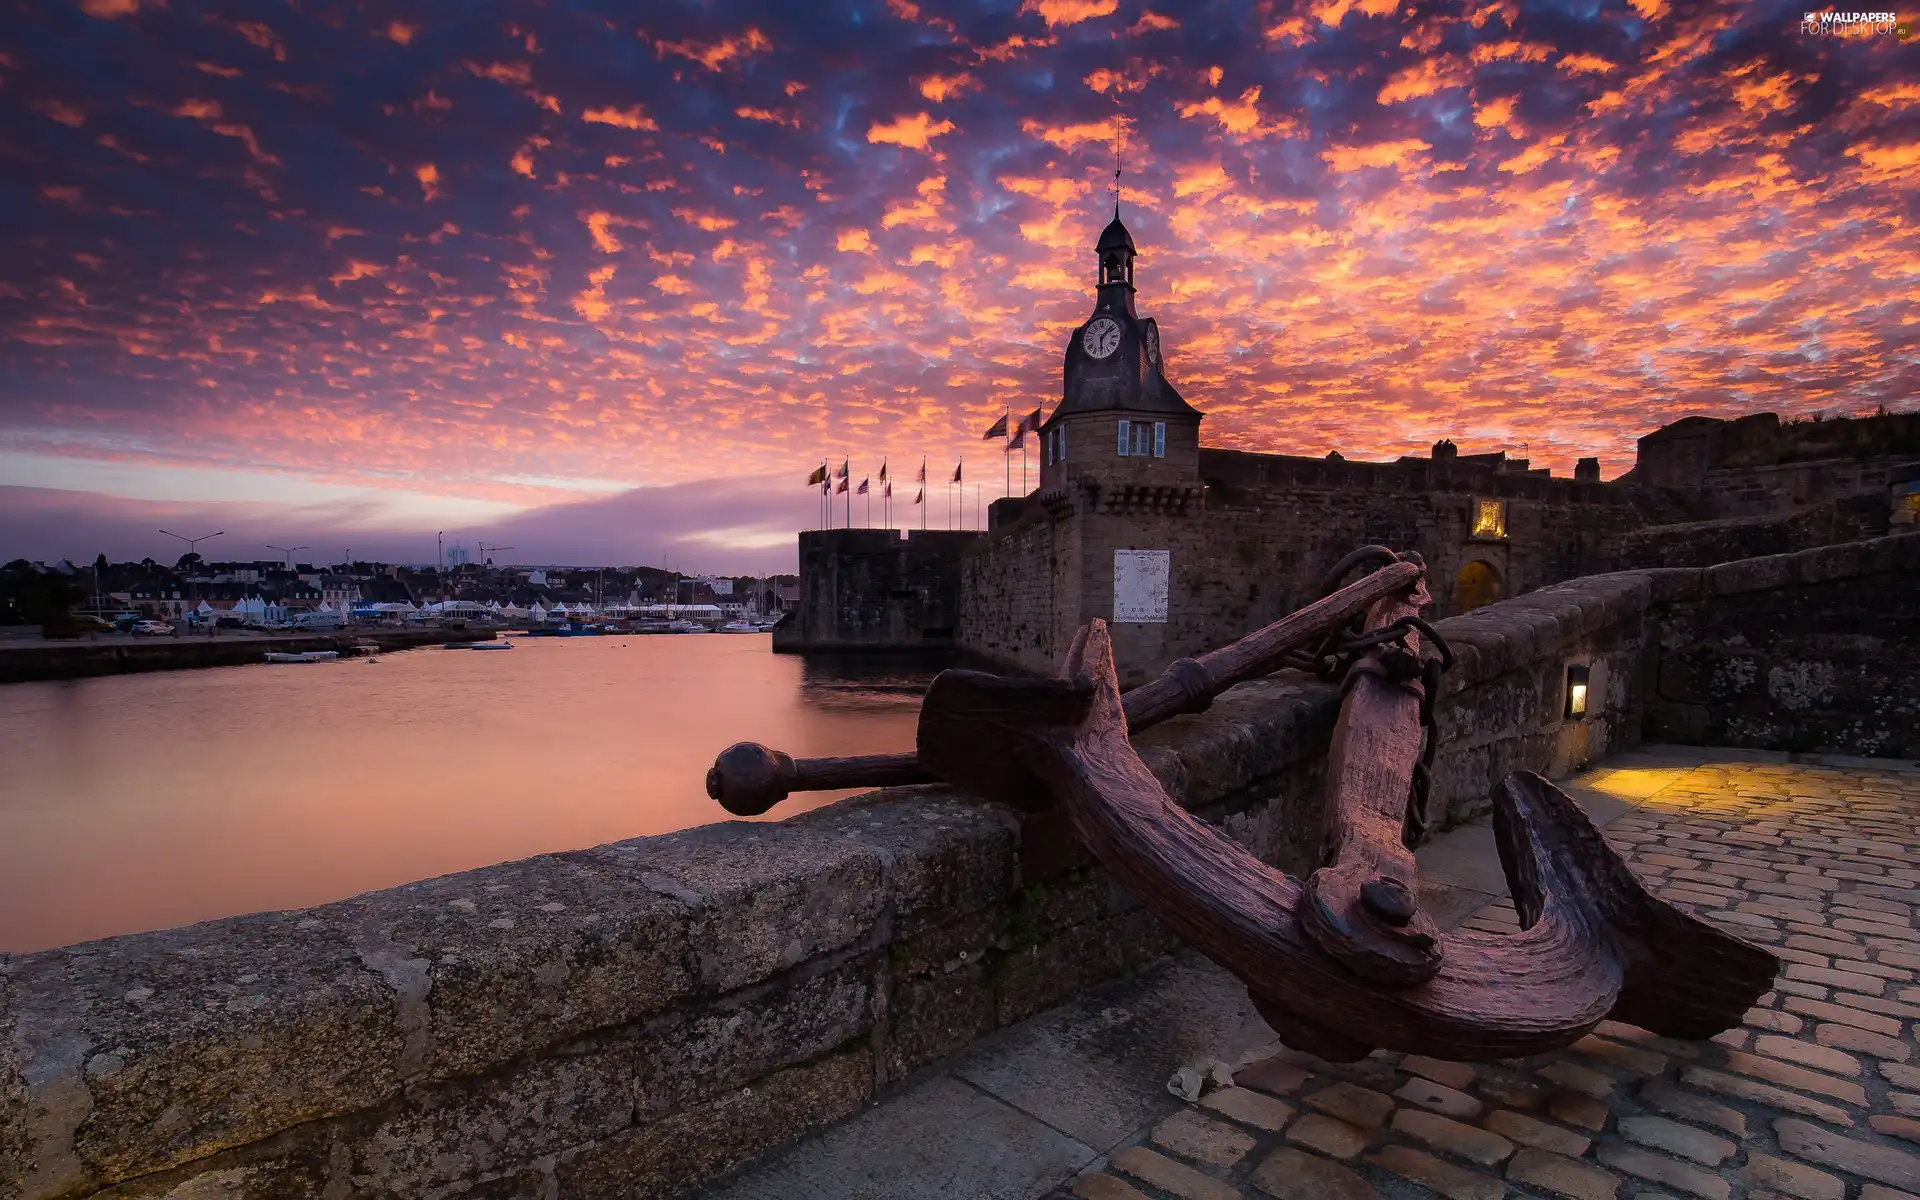 Great Sunsets, River, the walls, anchor, tower, clouds